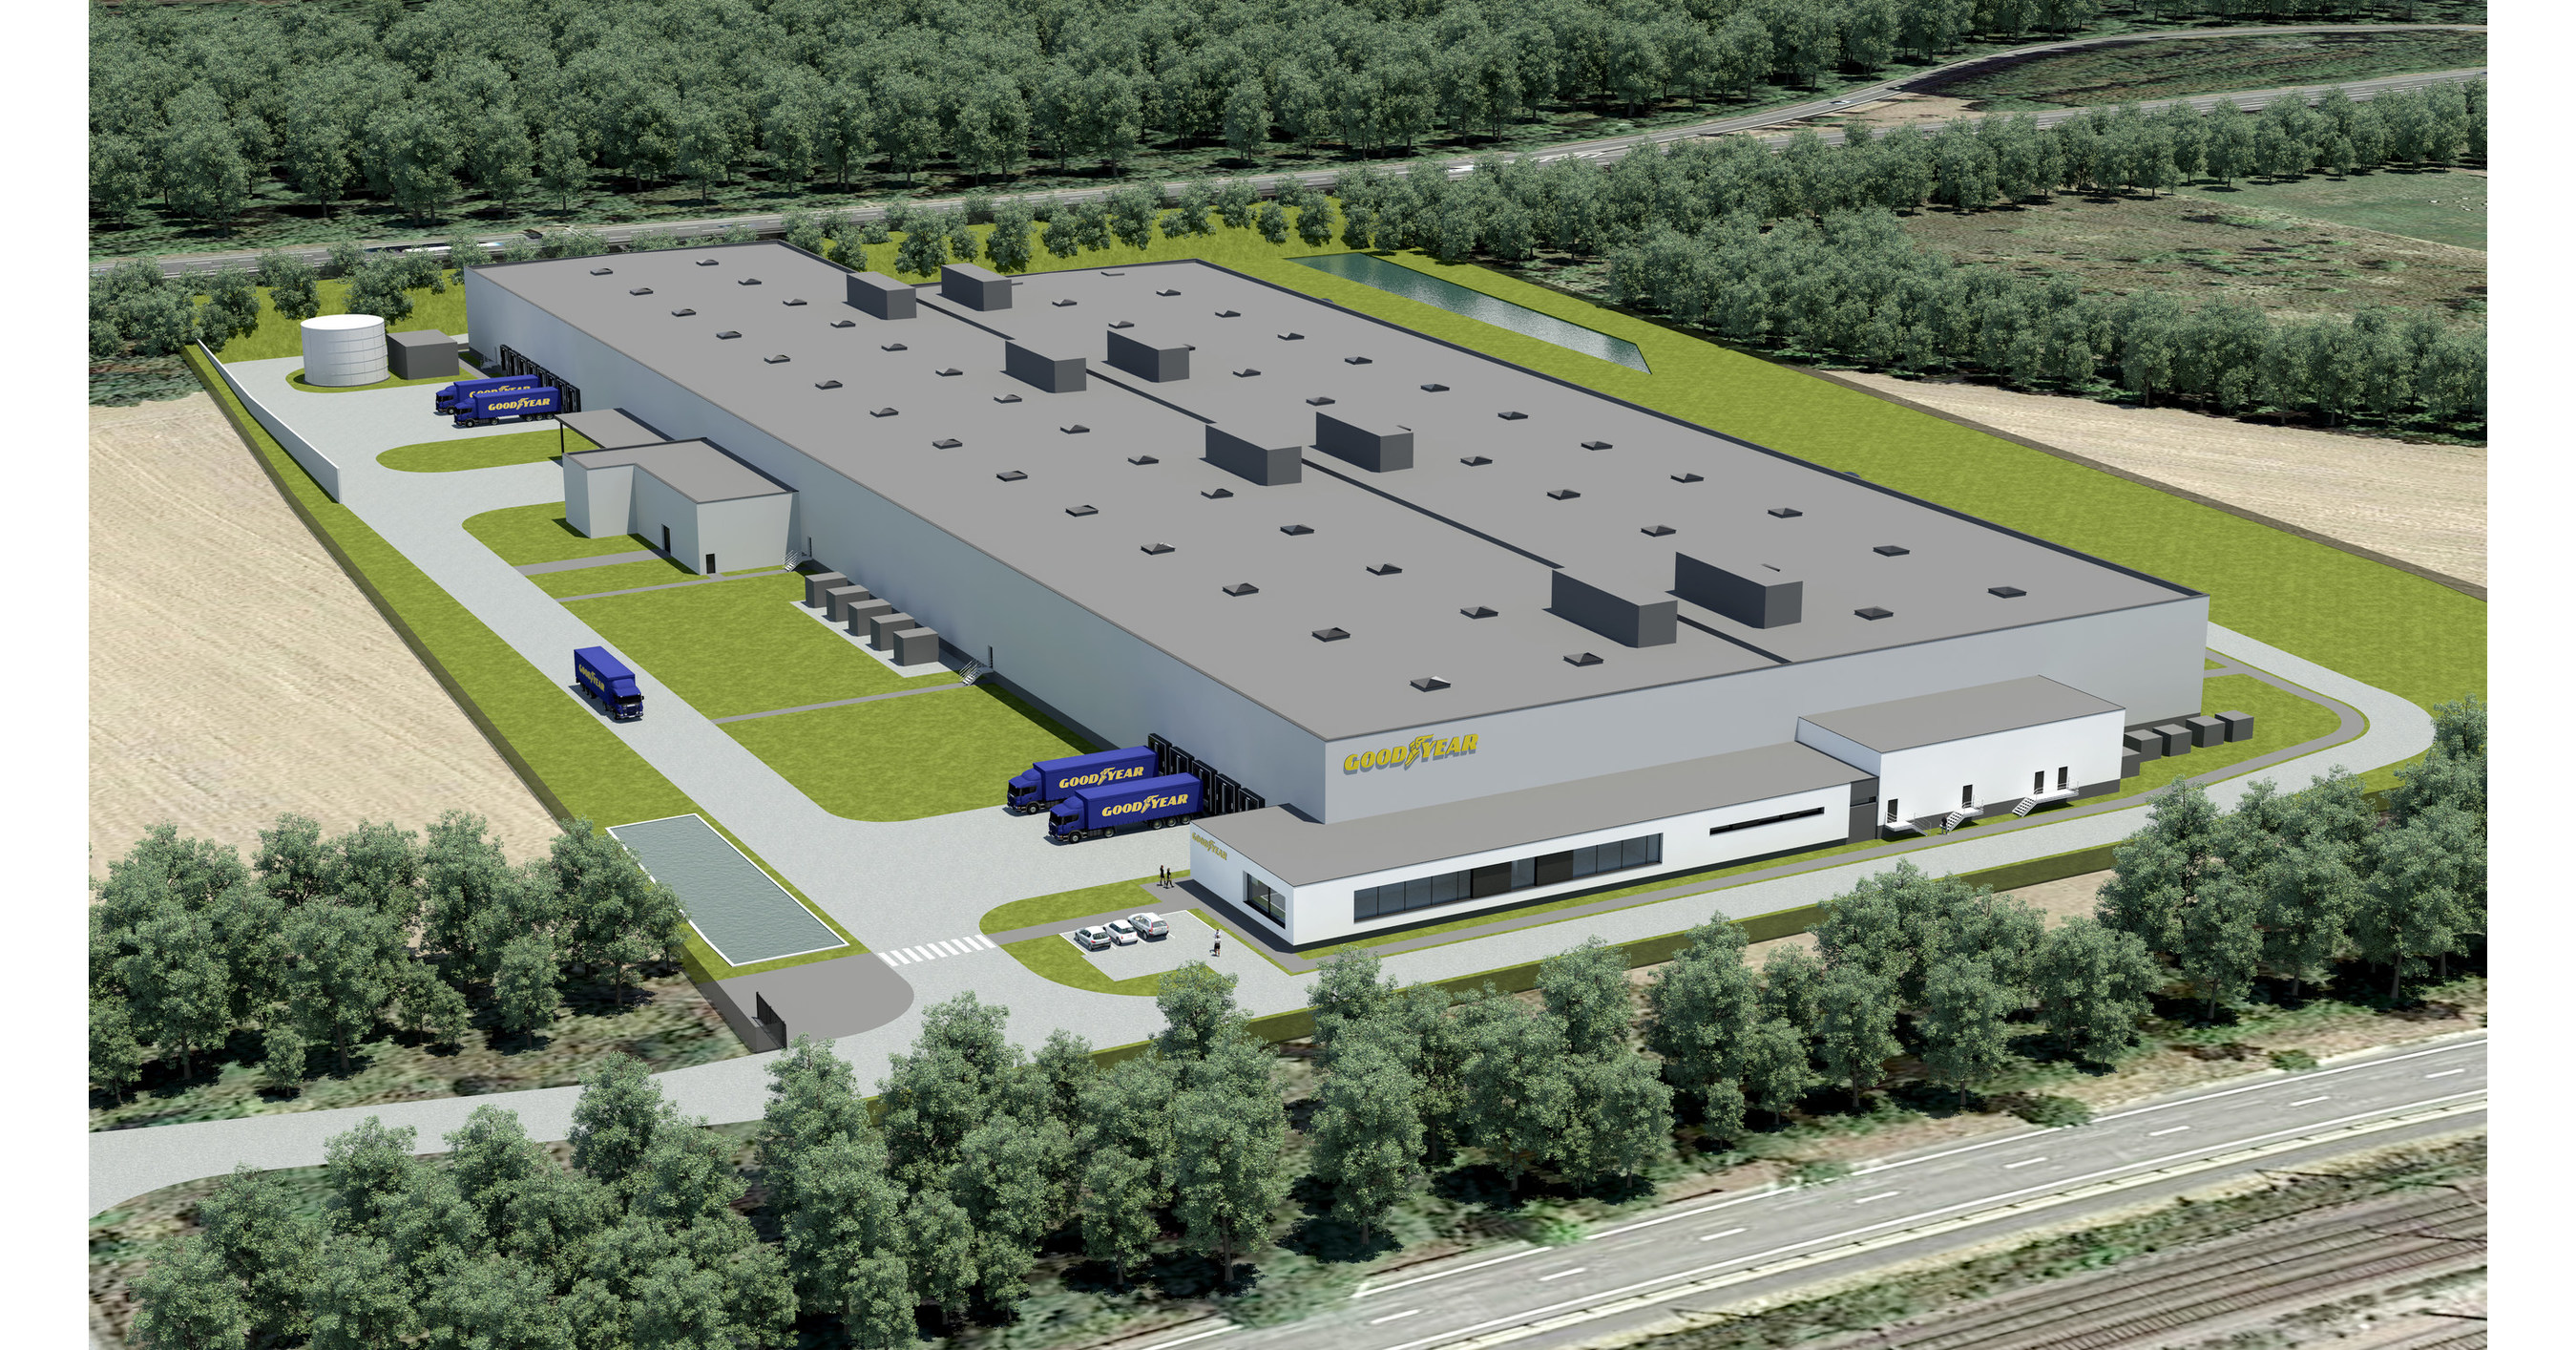 Goodyear Connected-Business Model with Facility